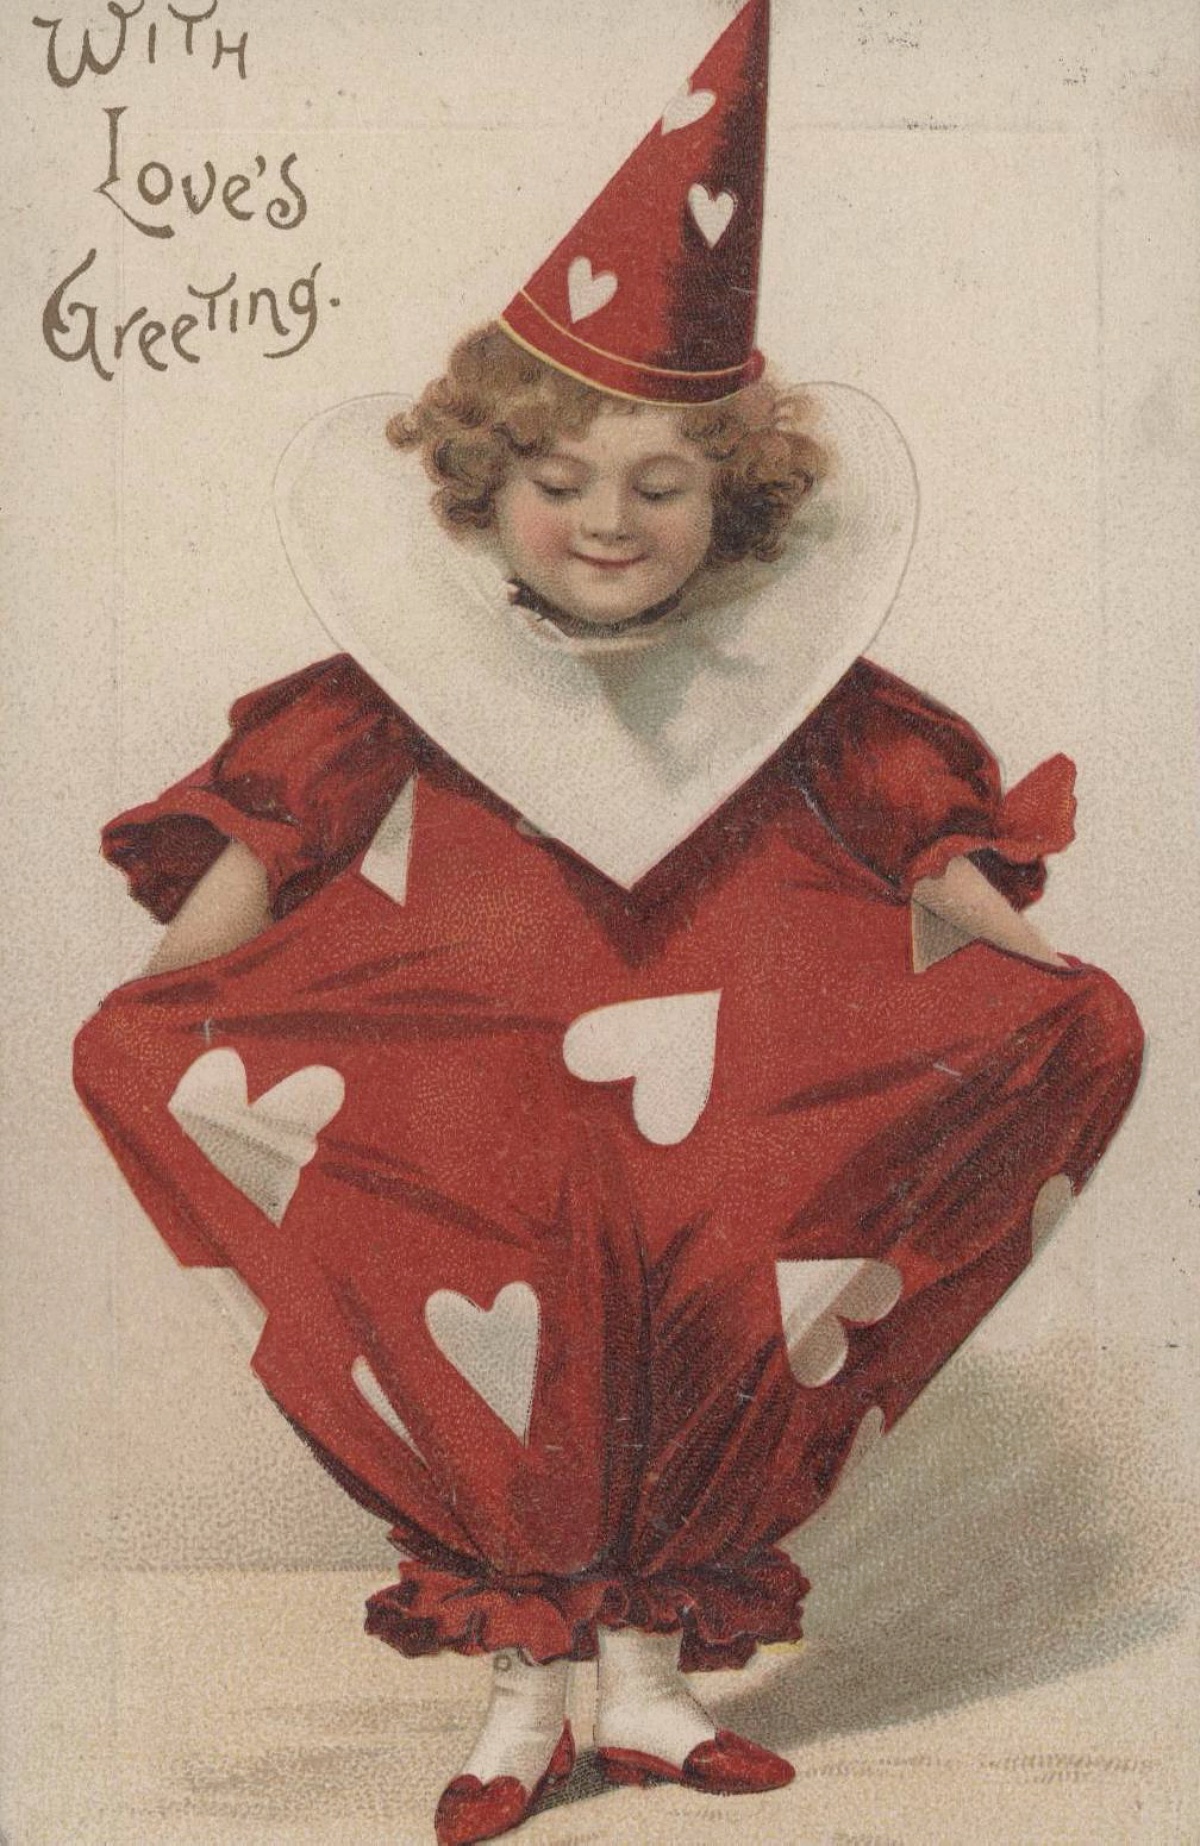 Valentine's Day card from 1908